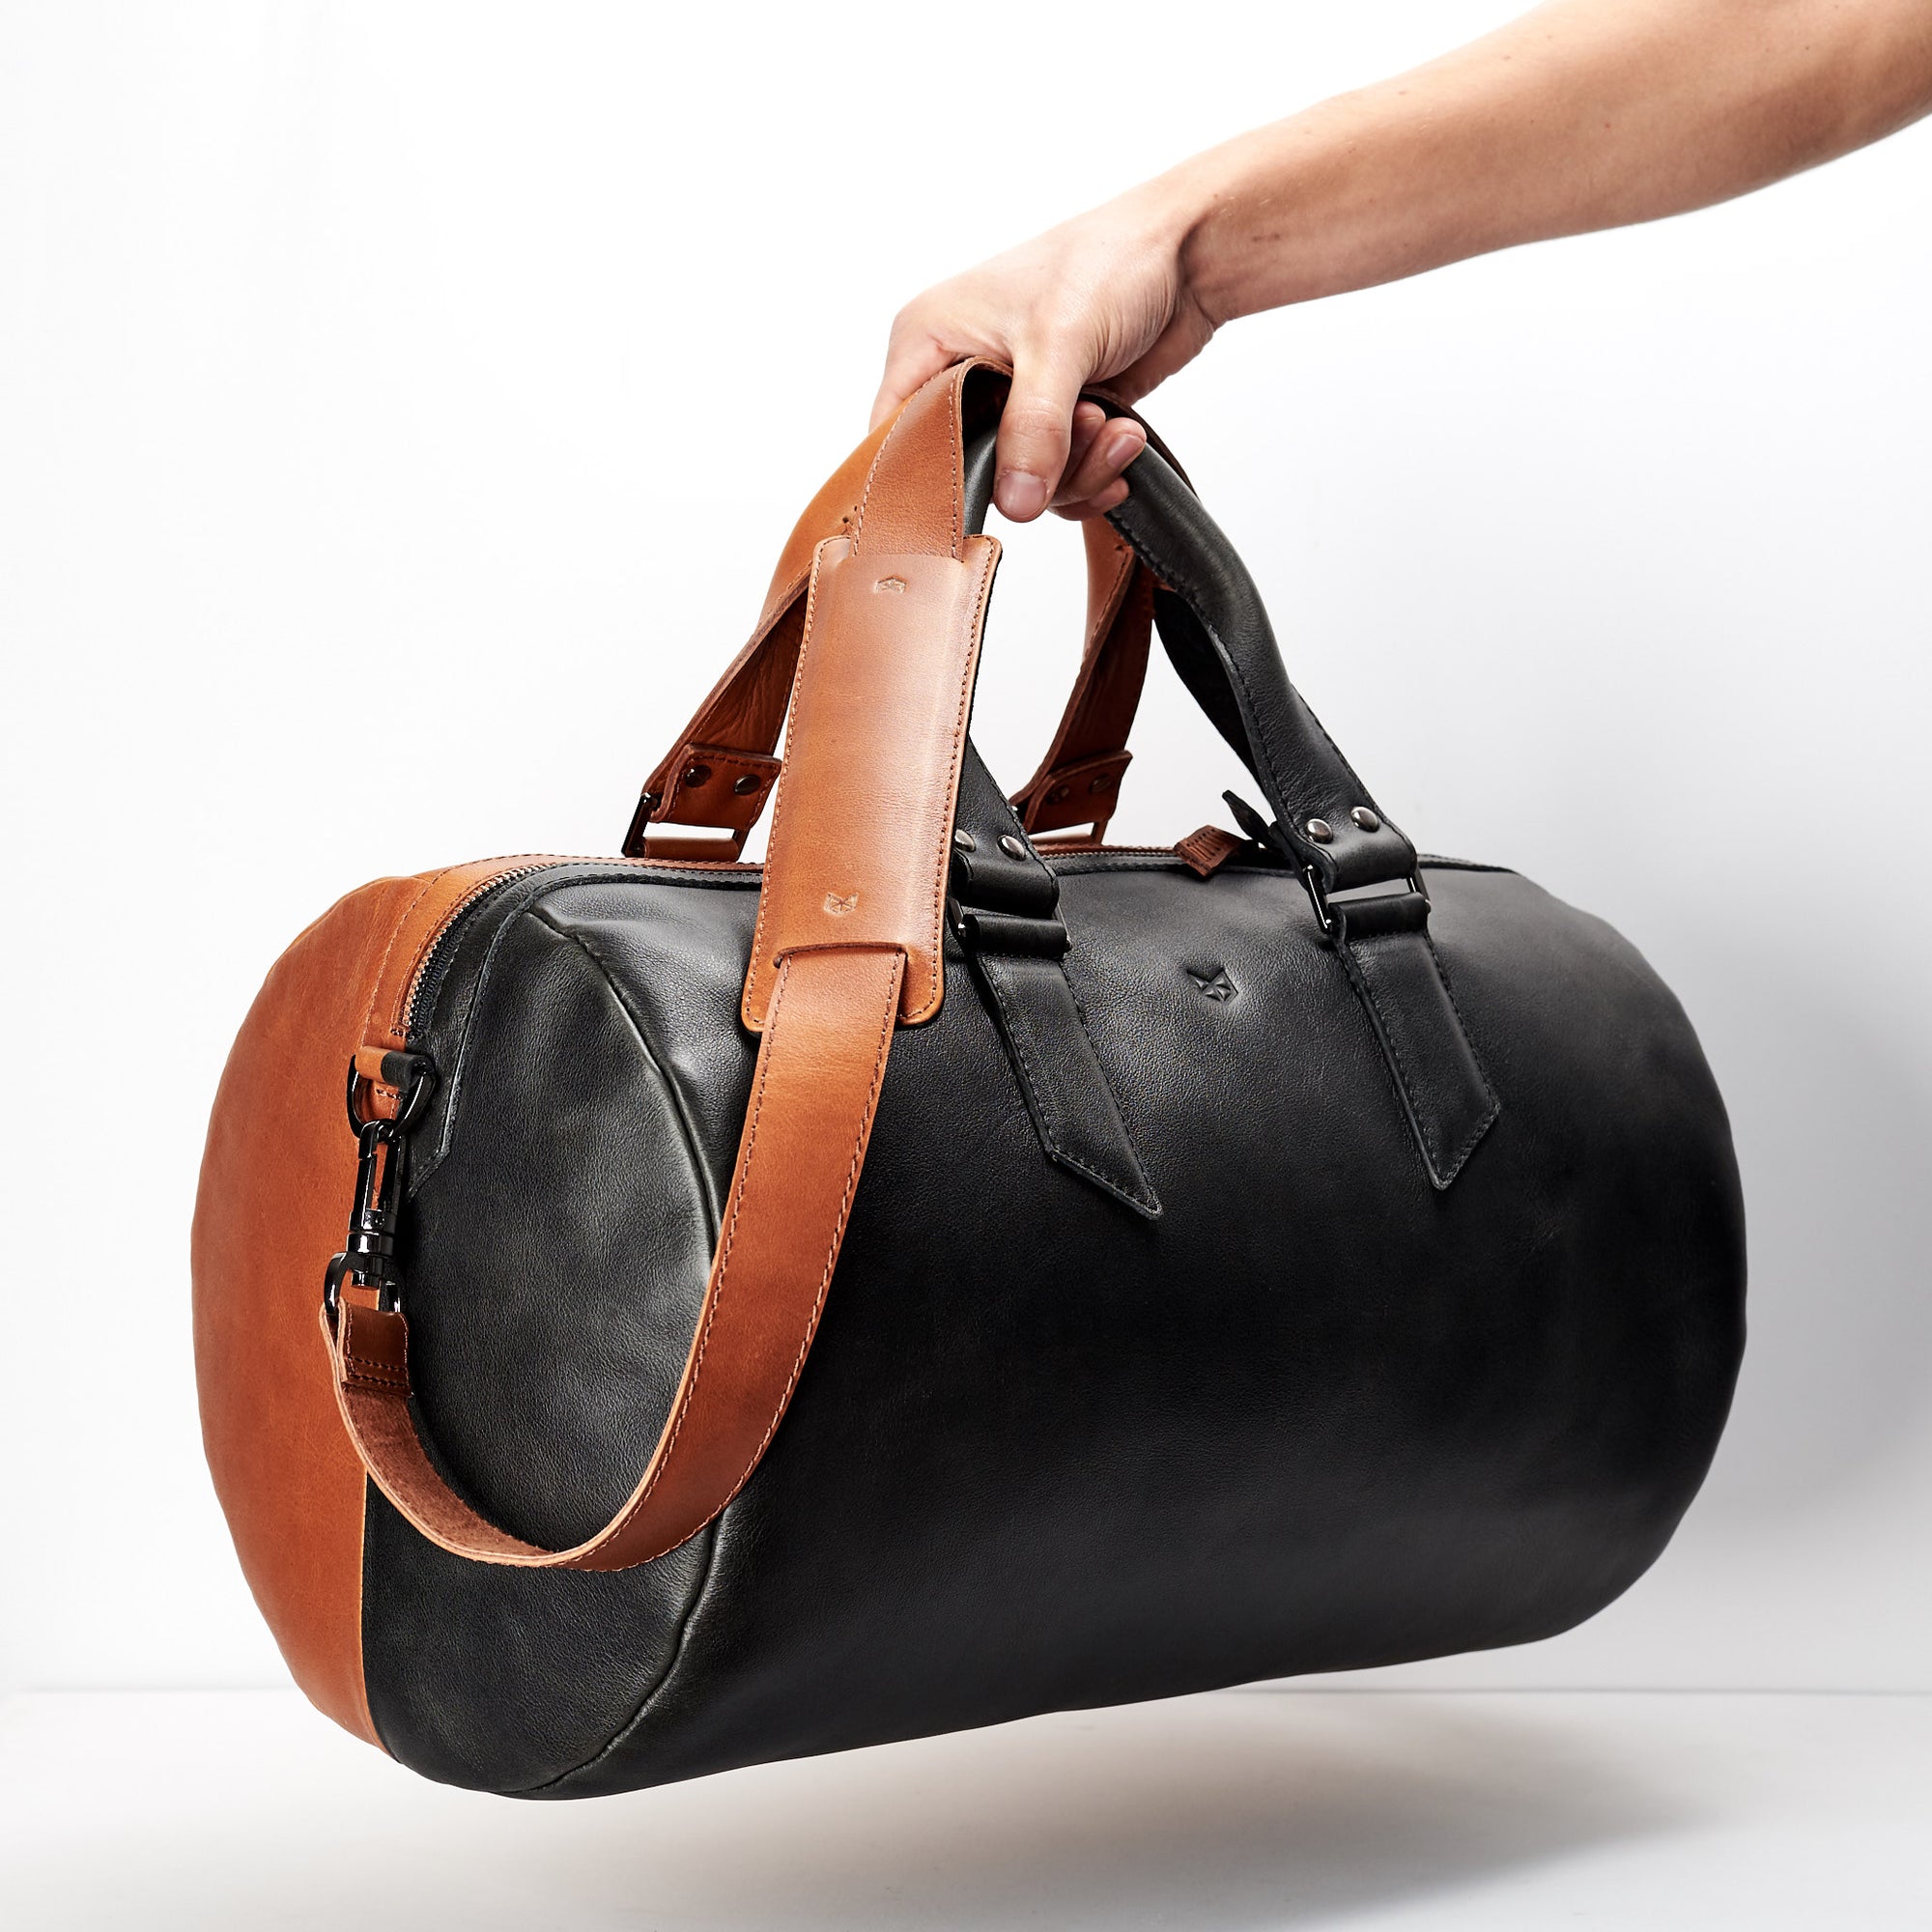 Style. Double color men's duffle bag. Limited edition designer product. Unique weekender for travel. 